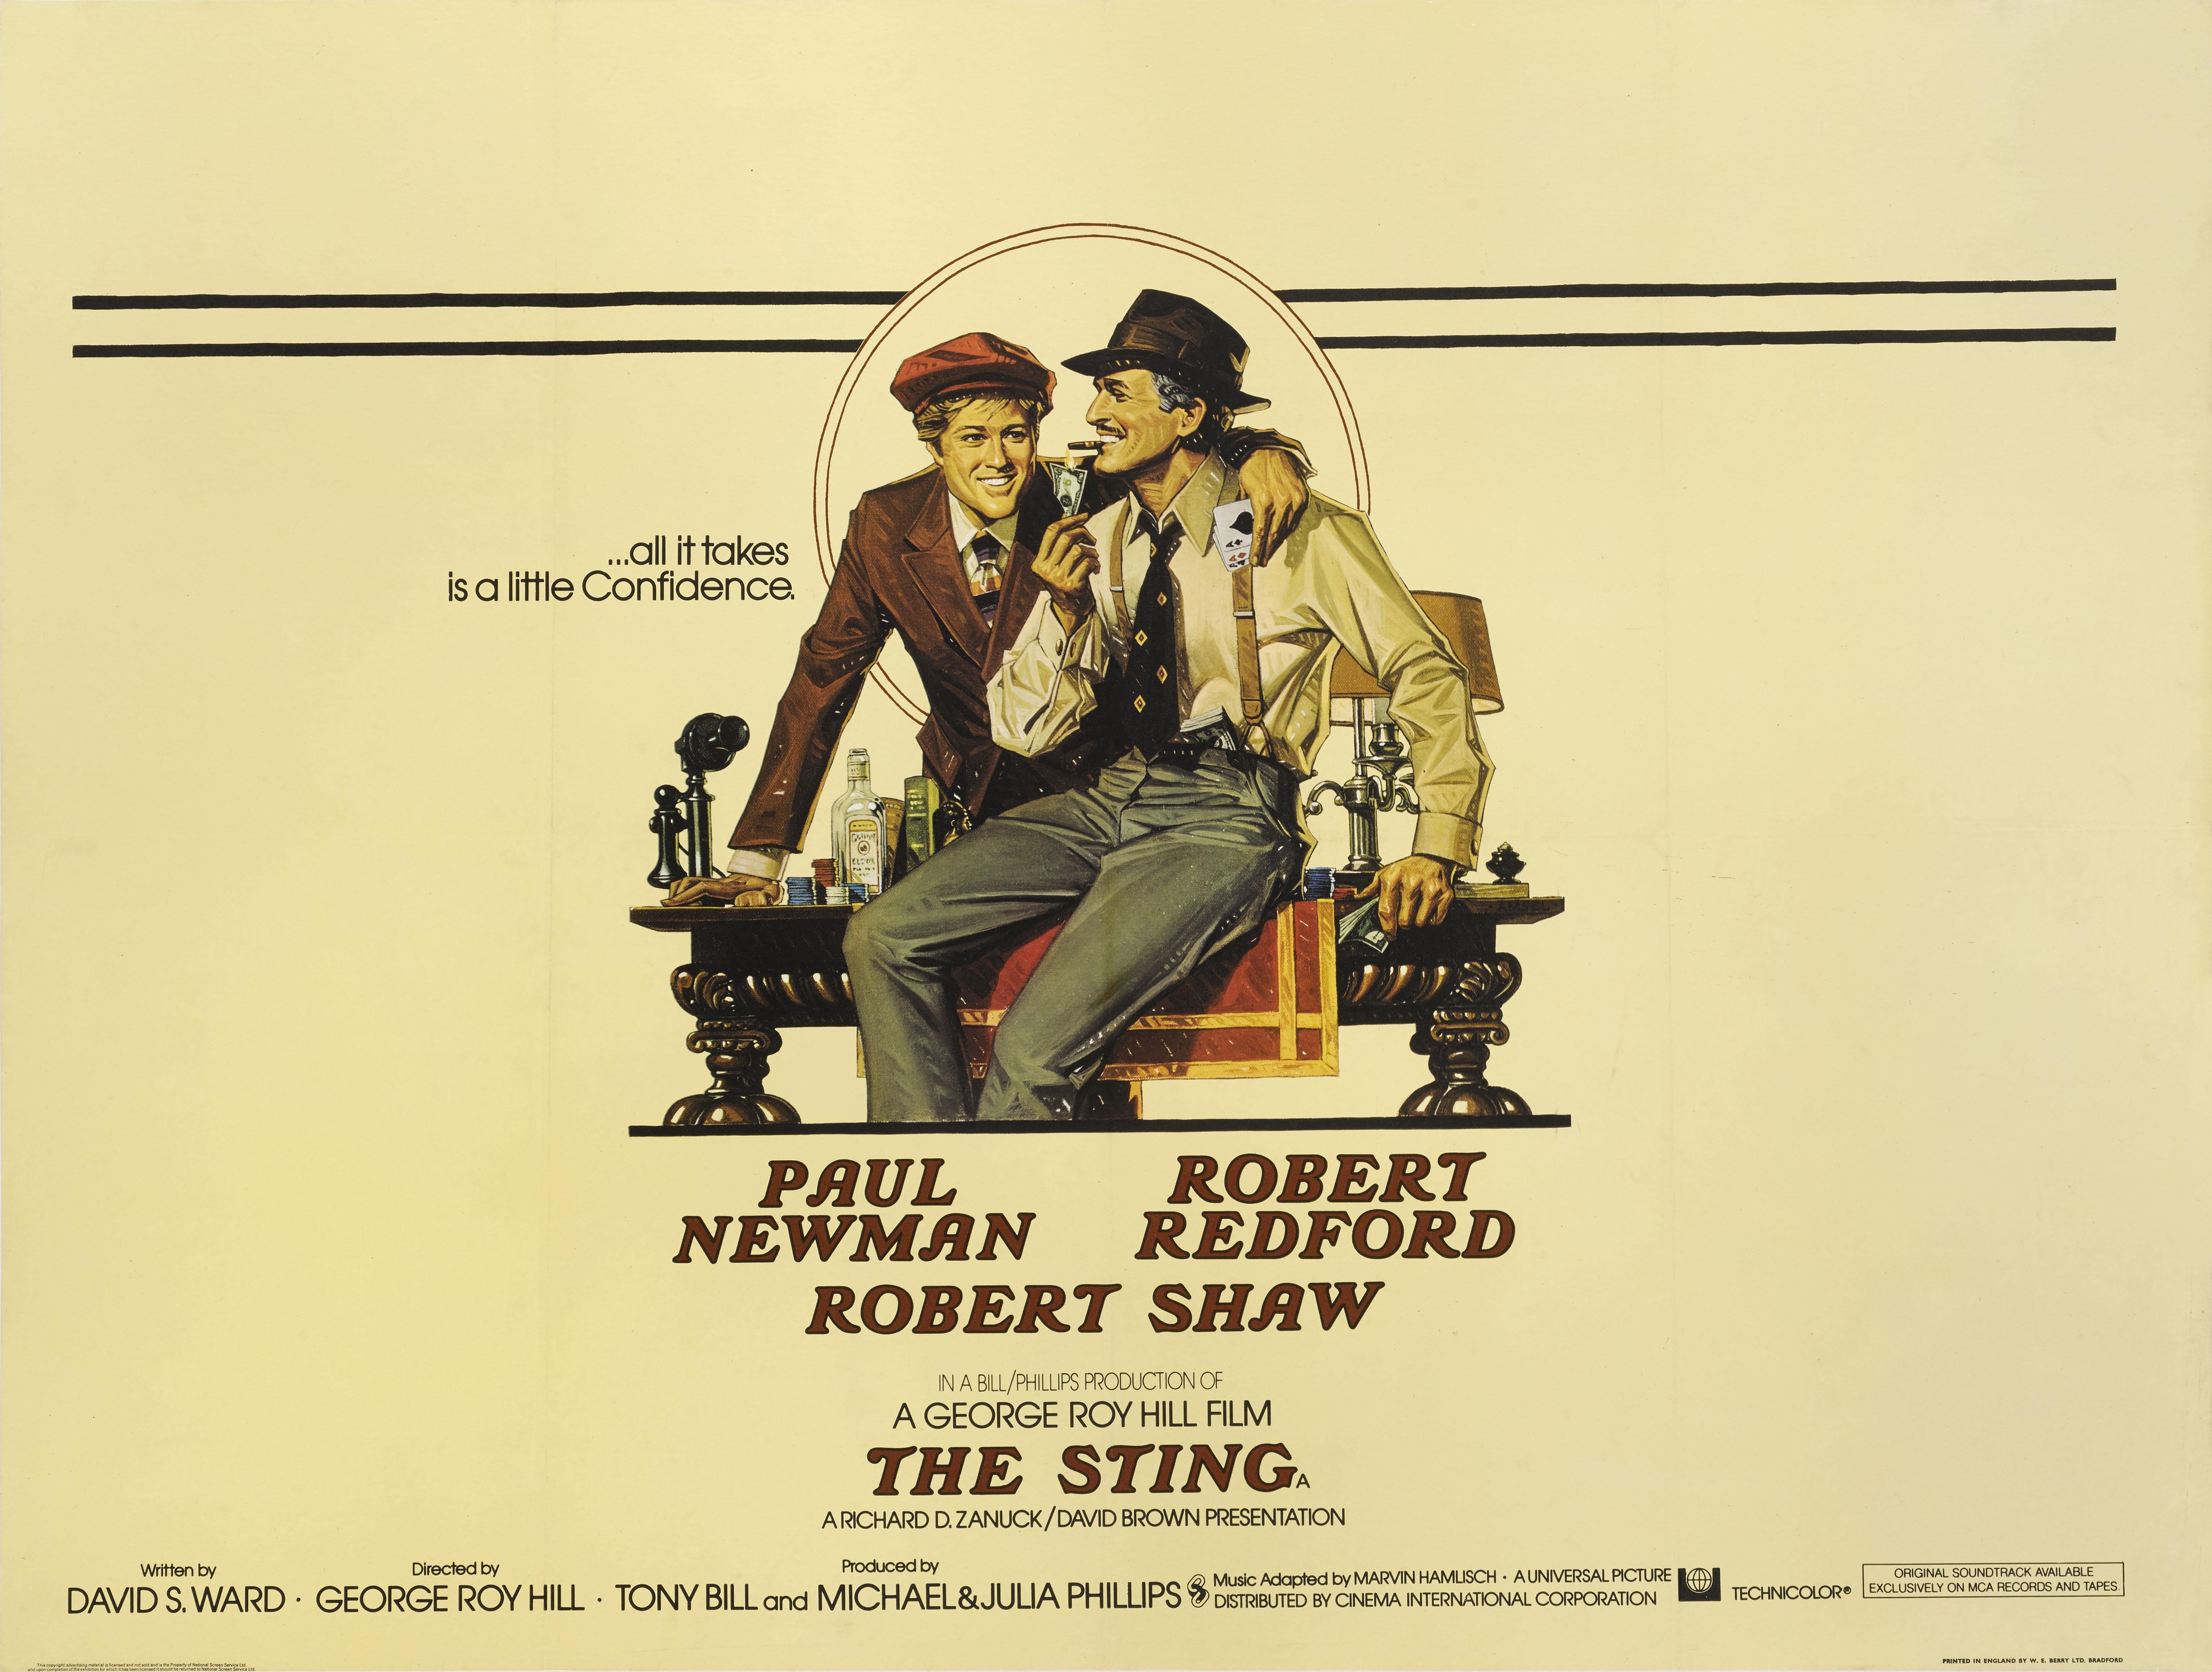 Original British film poster for The Sting, 1974. Starring Robert Redford, Paul Newman, Robert Shaw and directed by George Roy Hill. This poster is conservation linen backed and would be shipped rolled in a strong tube.